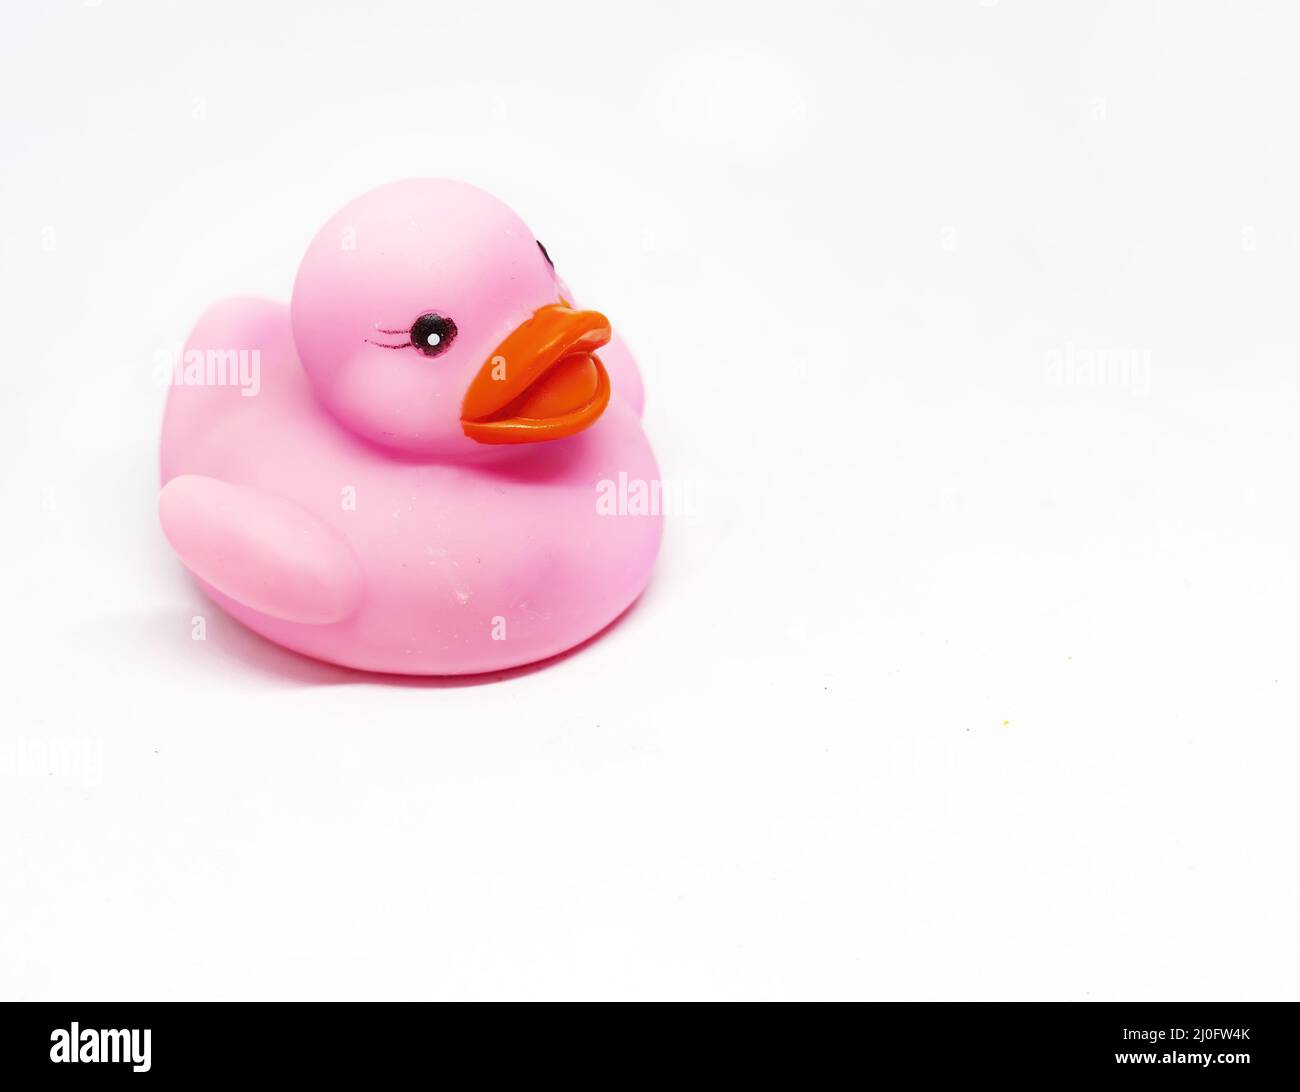 Pink rubber duck with orange beak isolated on a white background. Stock Photo